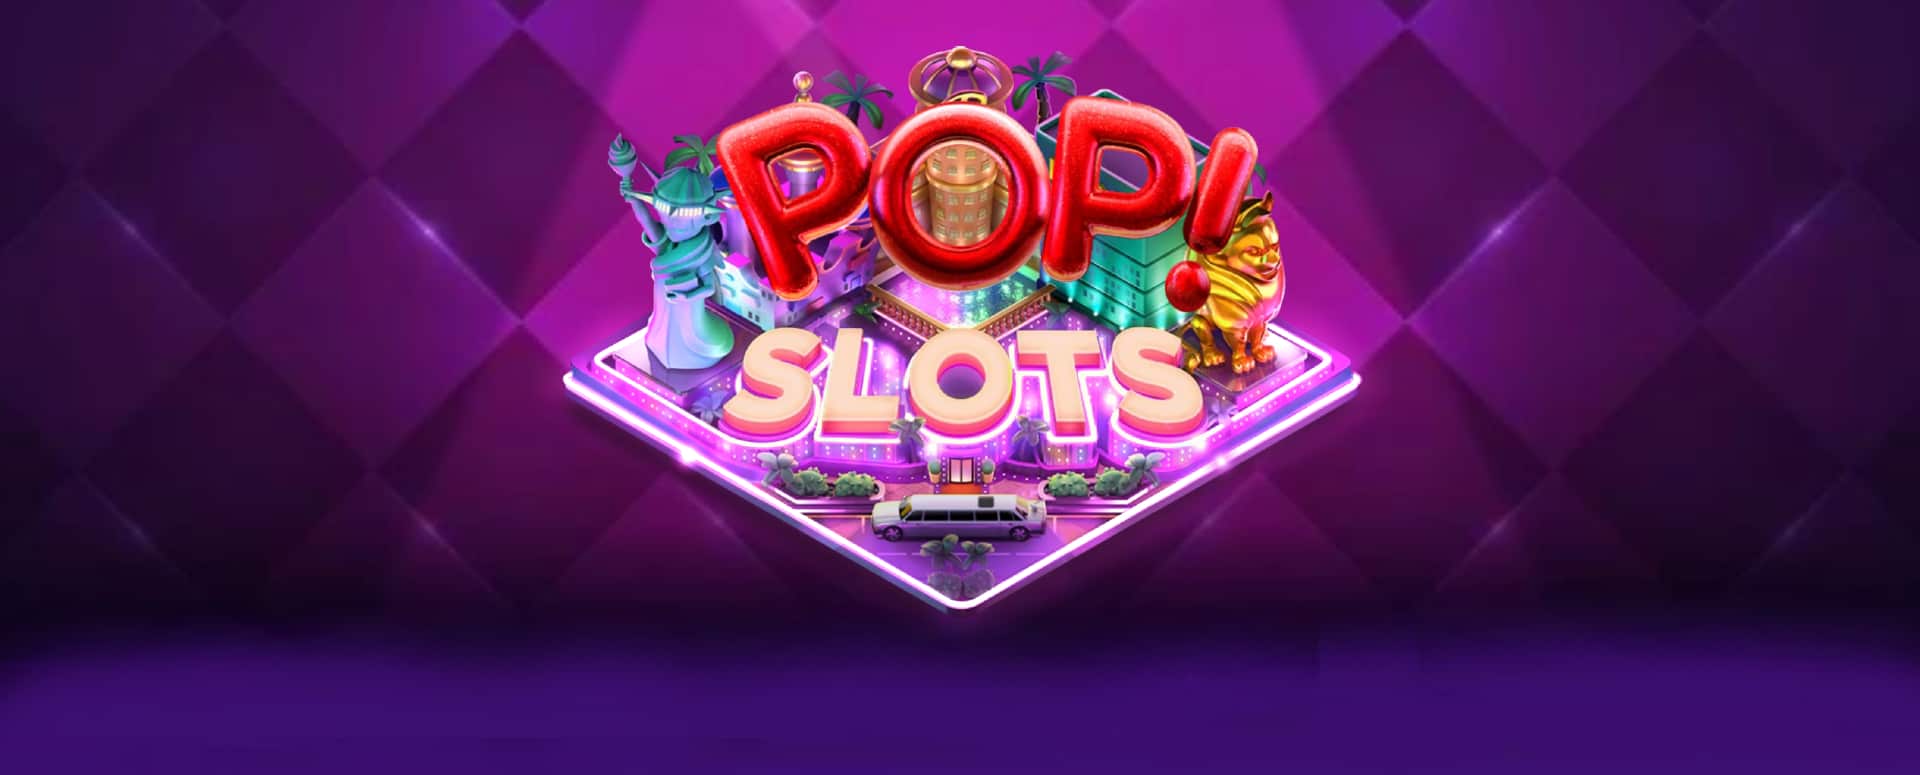 POP! Slots Cheats & Cheat Codes for IOS & Android - Cheat Code Central